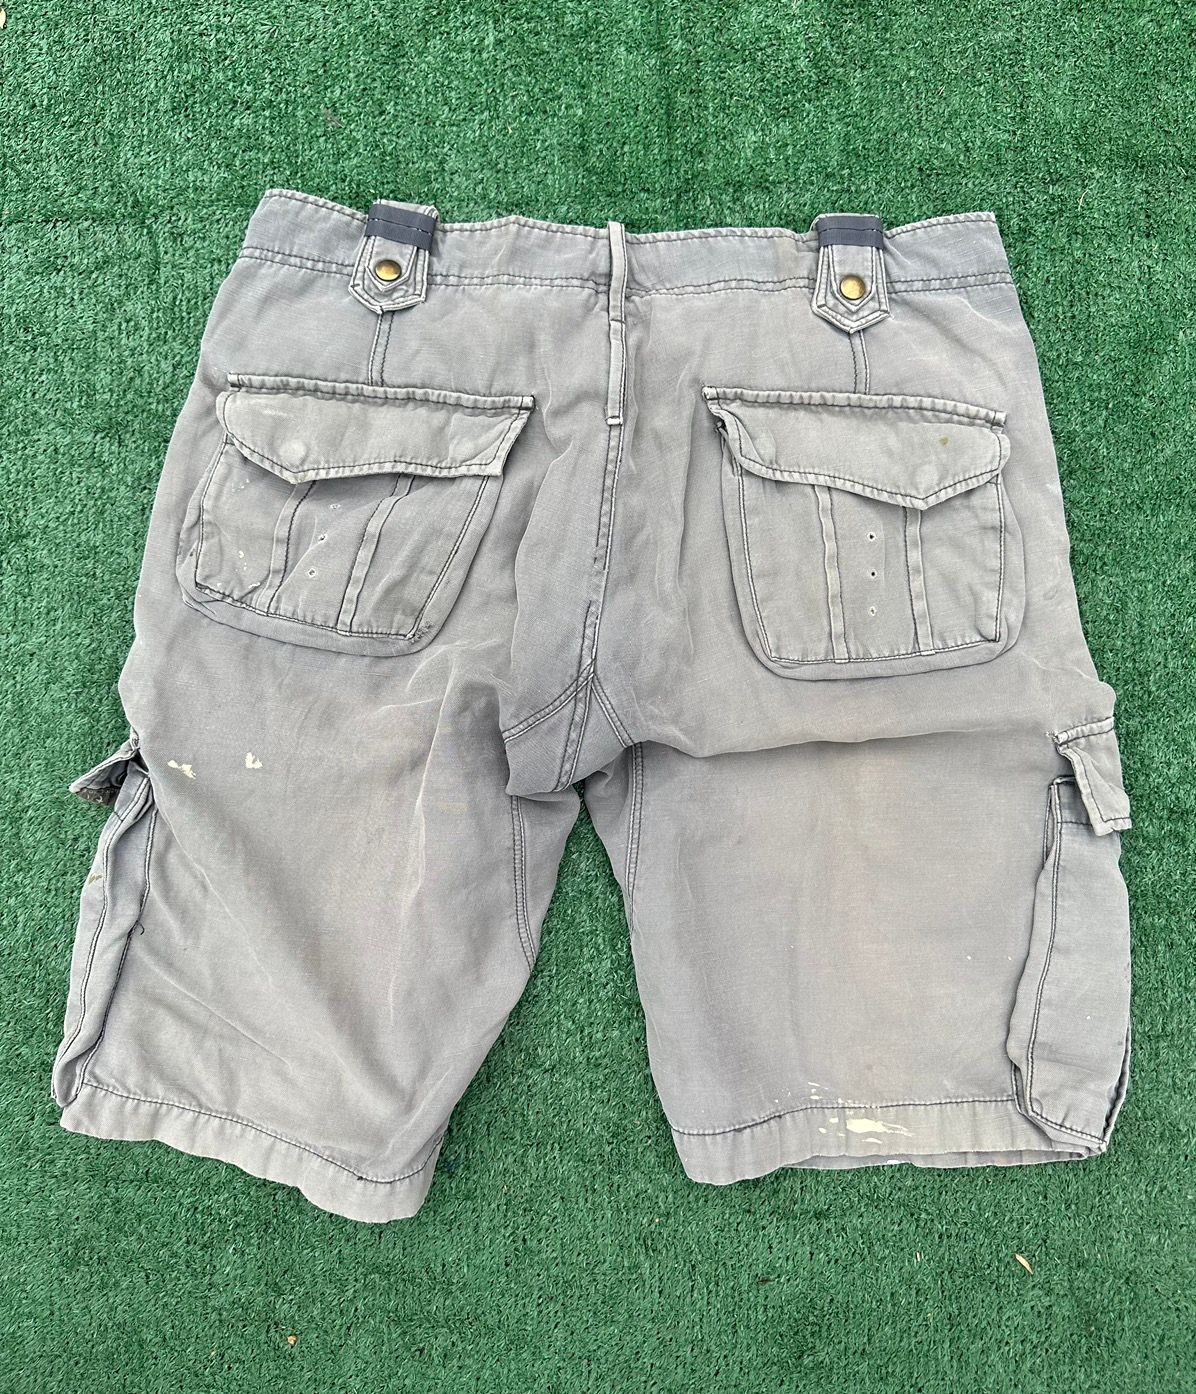 Diesel Diesel Distressed Faded Cargo shorts 34 Size US 34 / EU 50 - 2 Preview